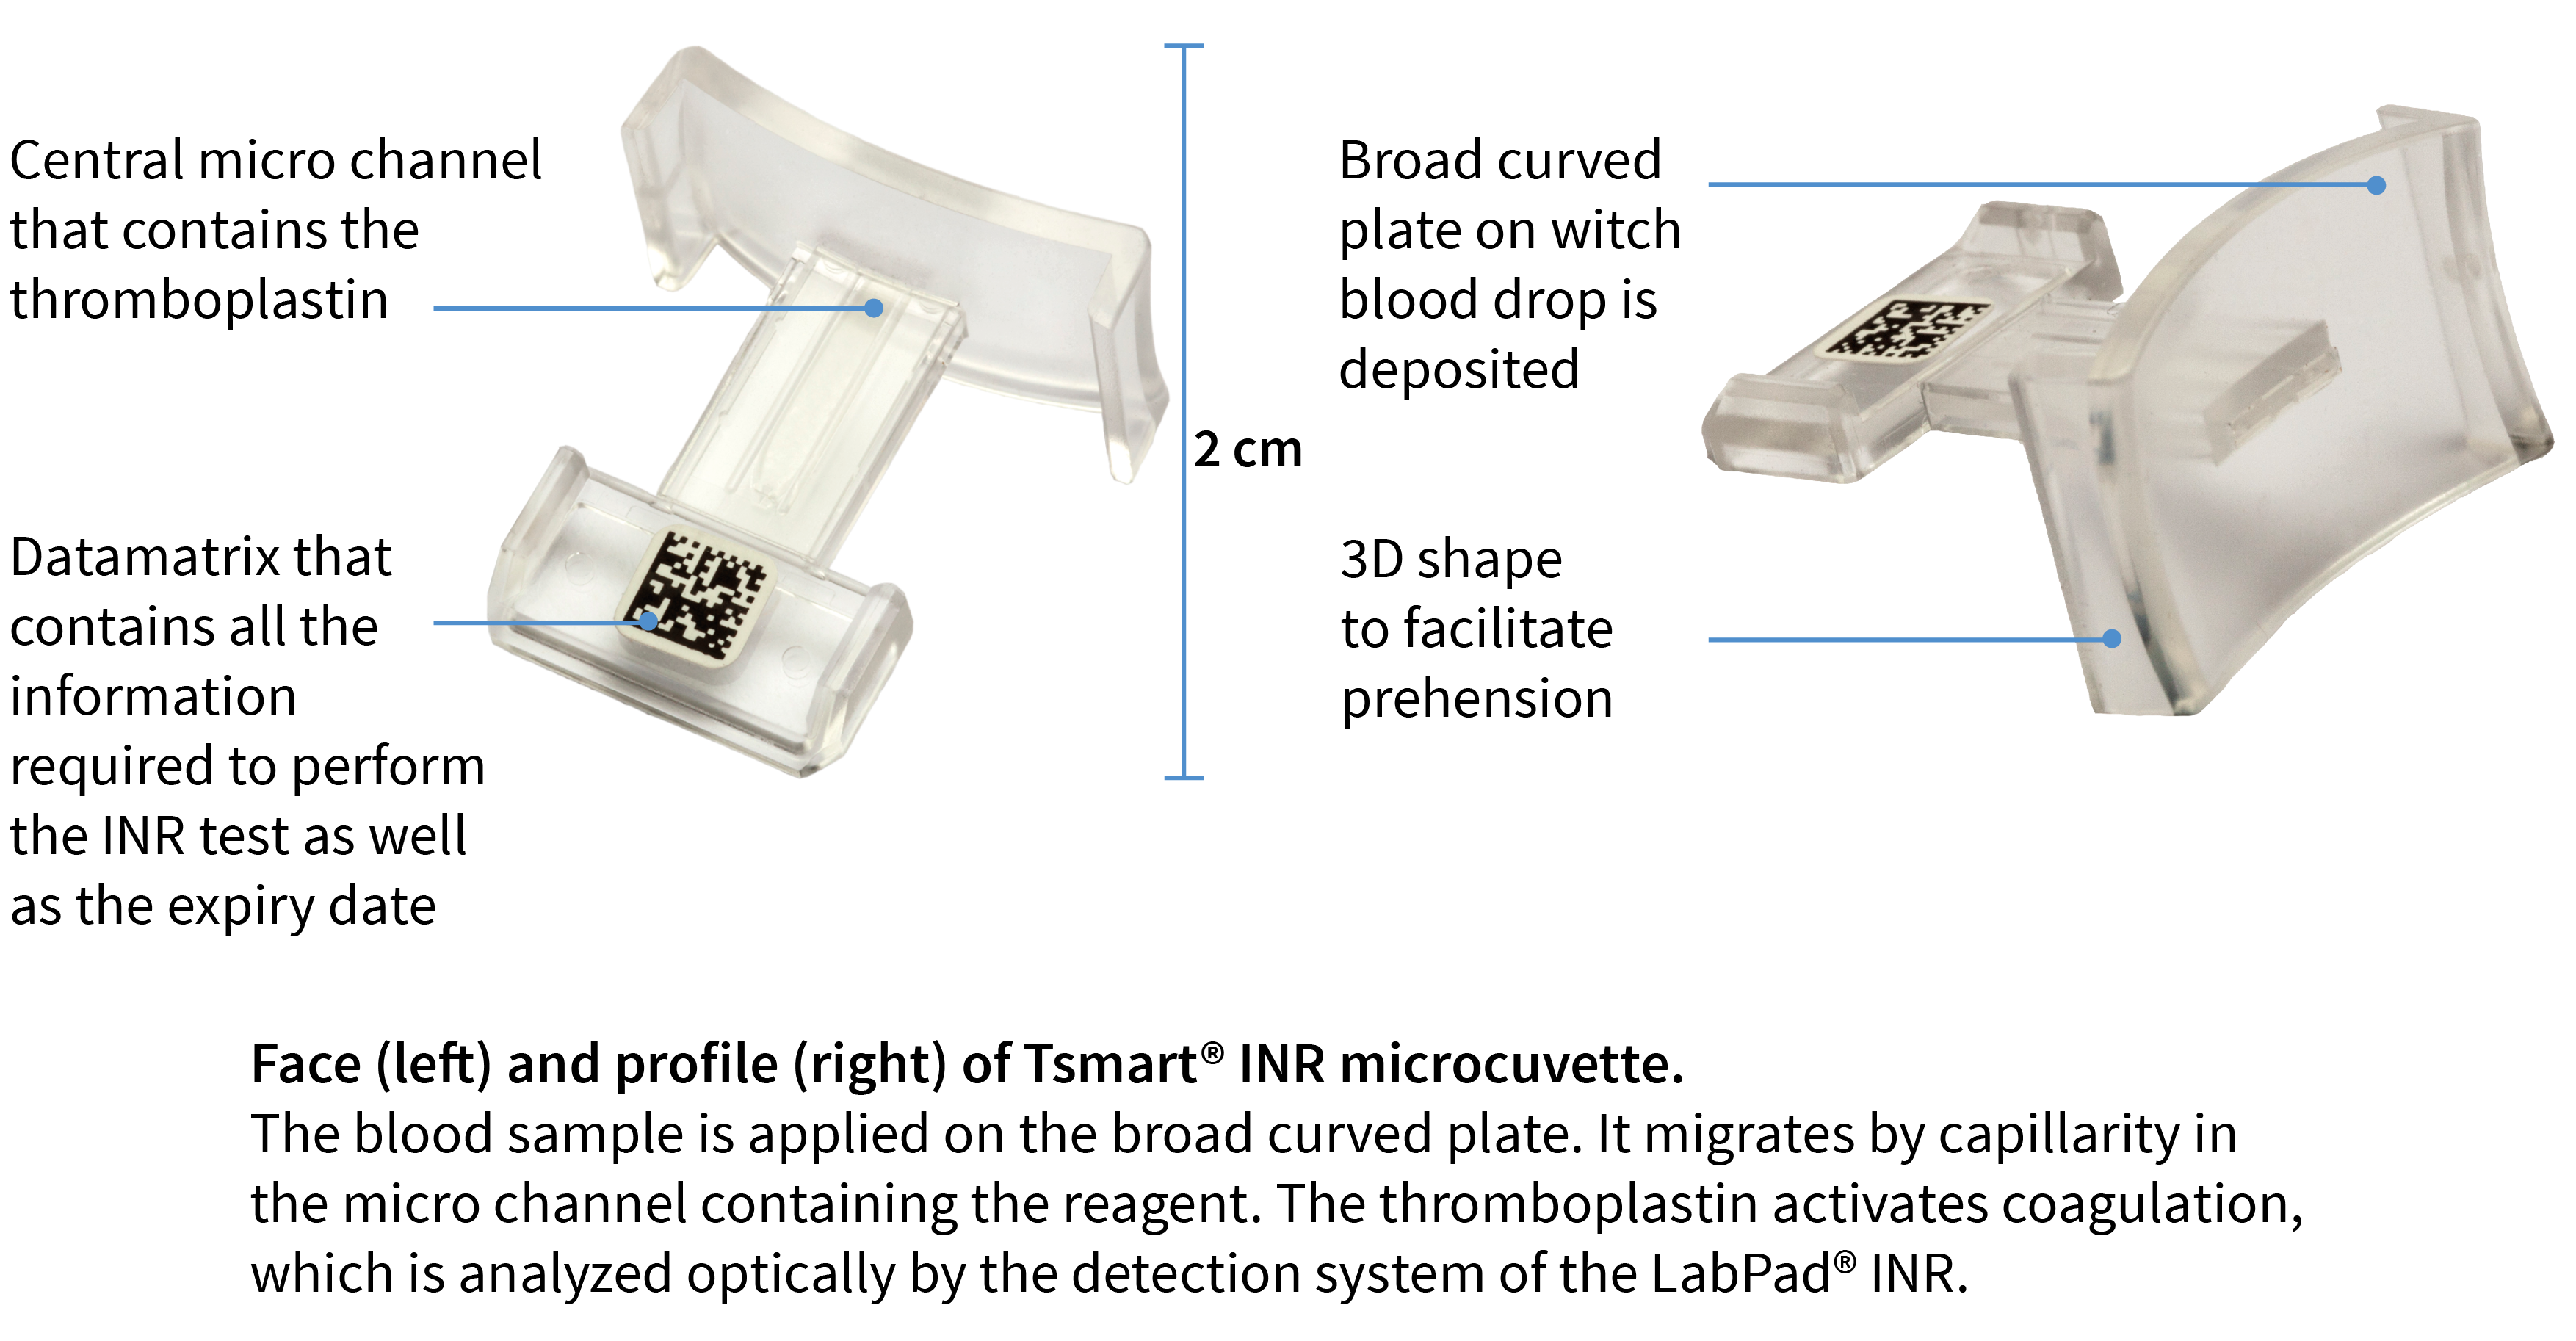 Microcuvette to perform PT/INR test